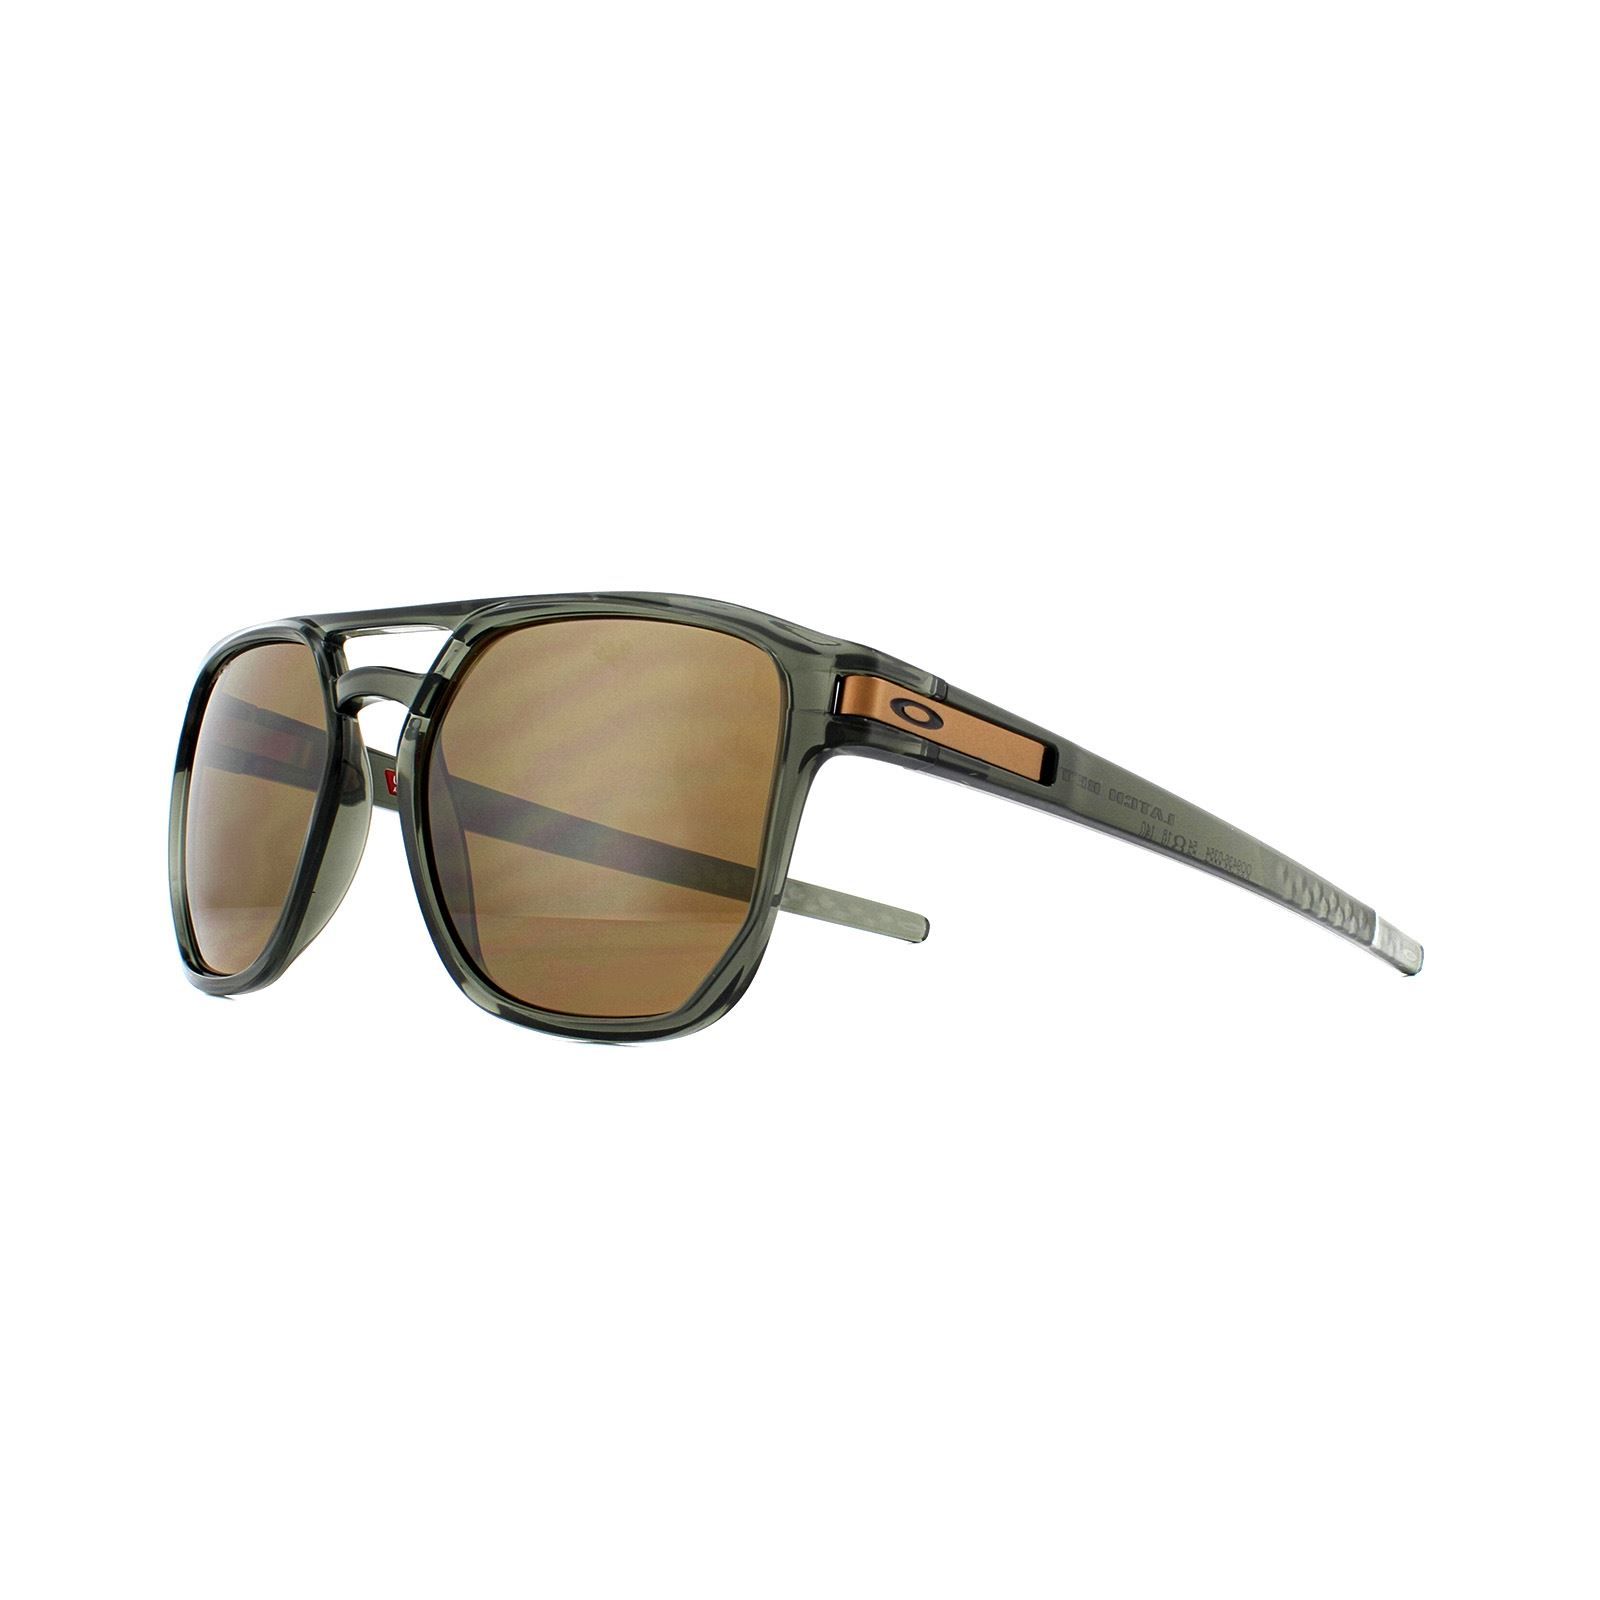 Oakley Sunglasses Latch Beta OO9436-03 Olive Ink Prizm Tungston are a part of the Latch family and a fresh update to one of the most popular Oakley styles with a bold lens shape and double bridge design. With a handy kick up latch feature, they attach to your shirt easily for storage. Made from lightweight O Matter, with the three-point fit they're extremely comfortable. Unobtainium temples also ensure that they stay in place at all times as grip increases with perspiration.